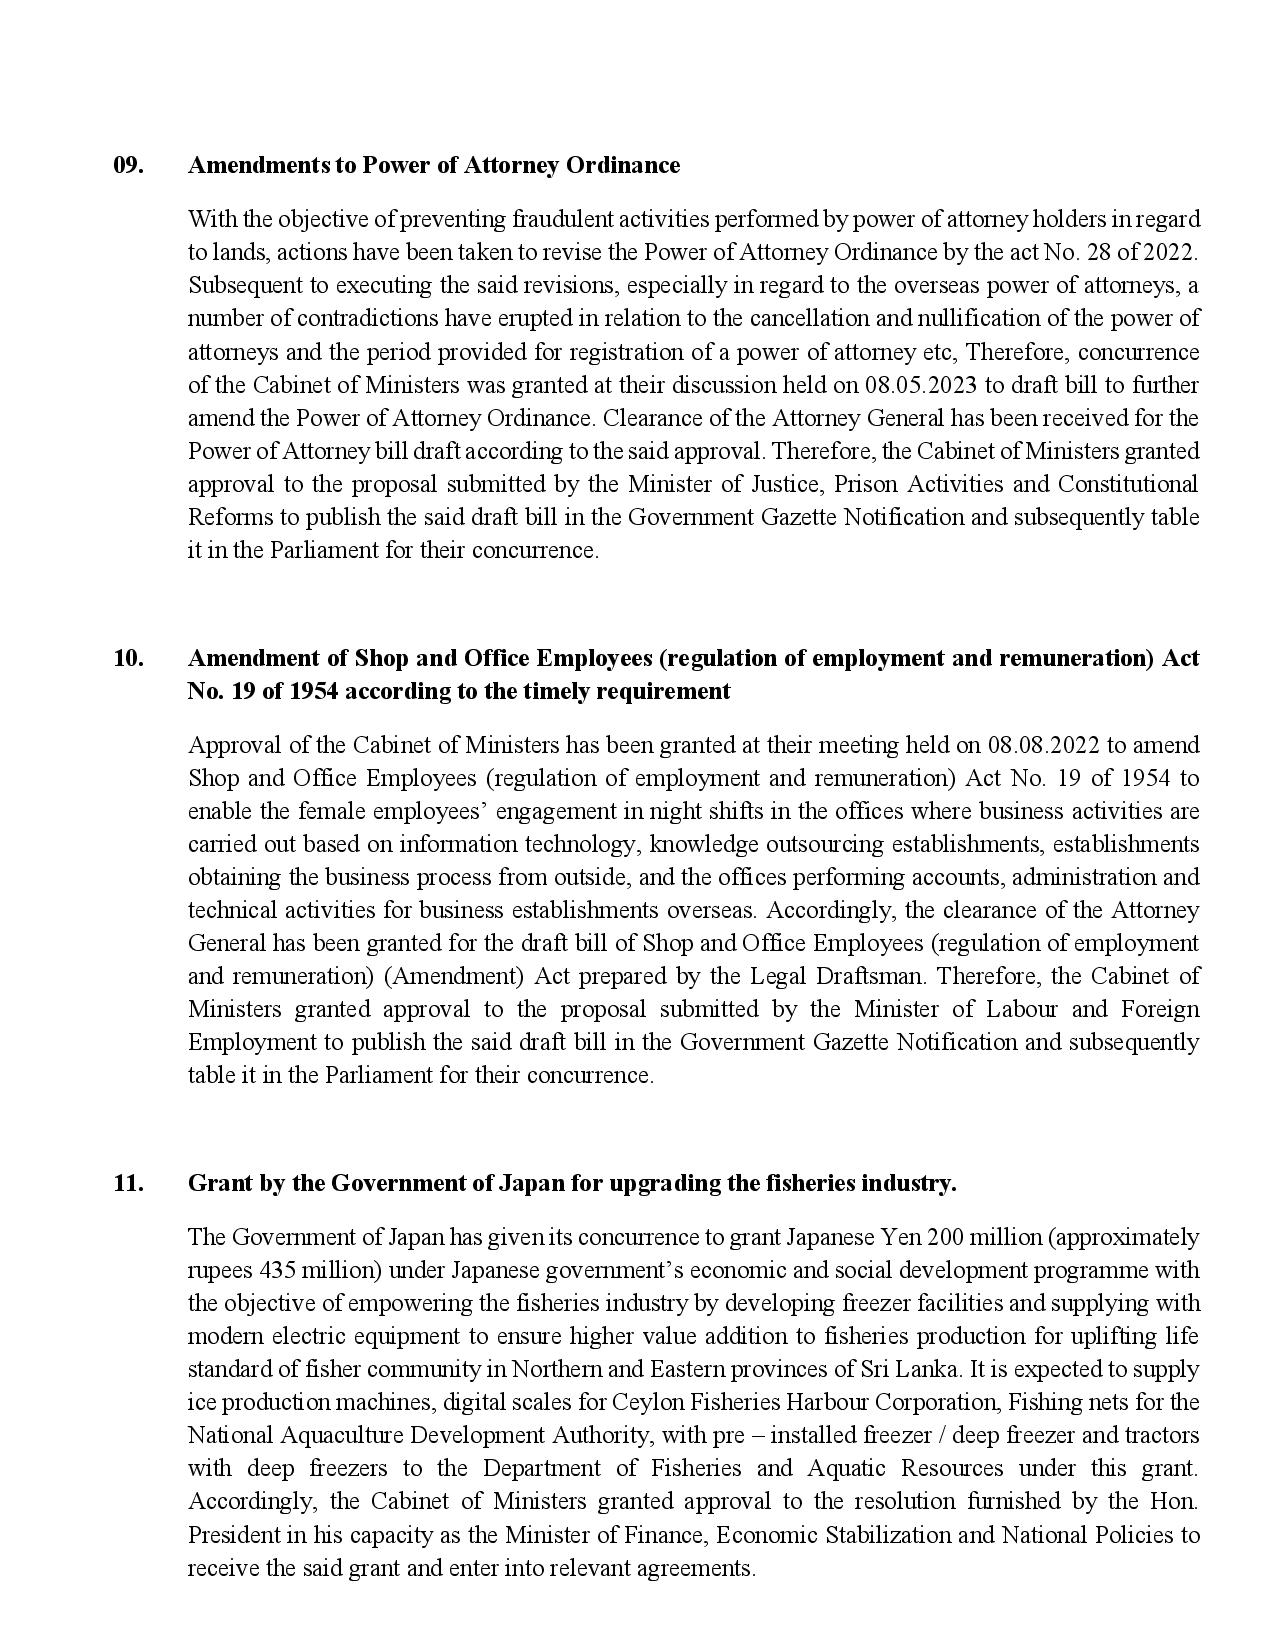 Cabinet Decision on 23.10.2023 English page 004